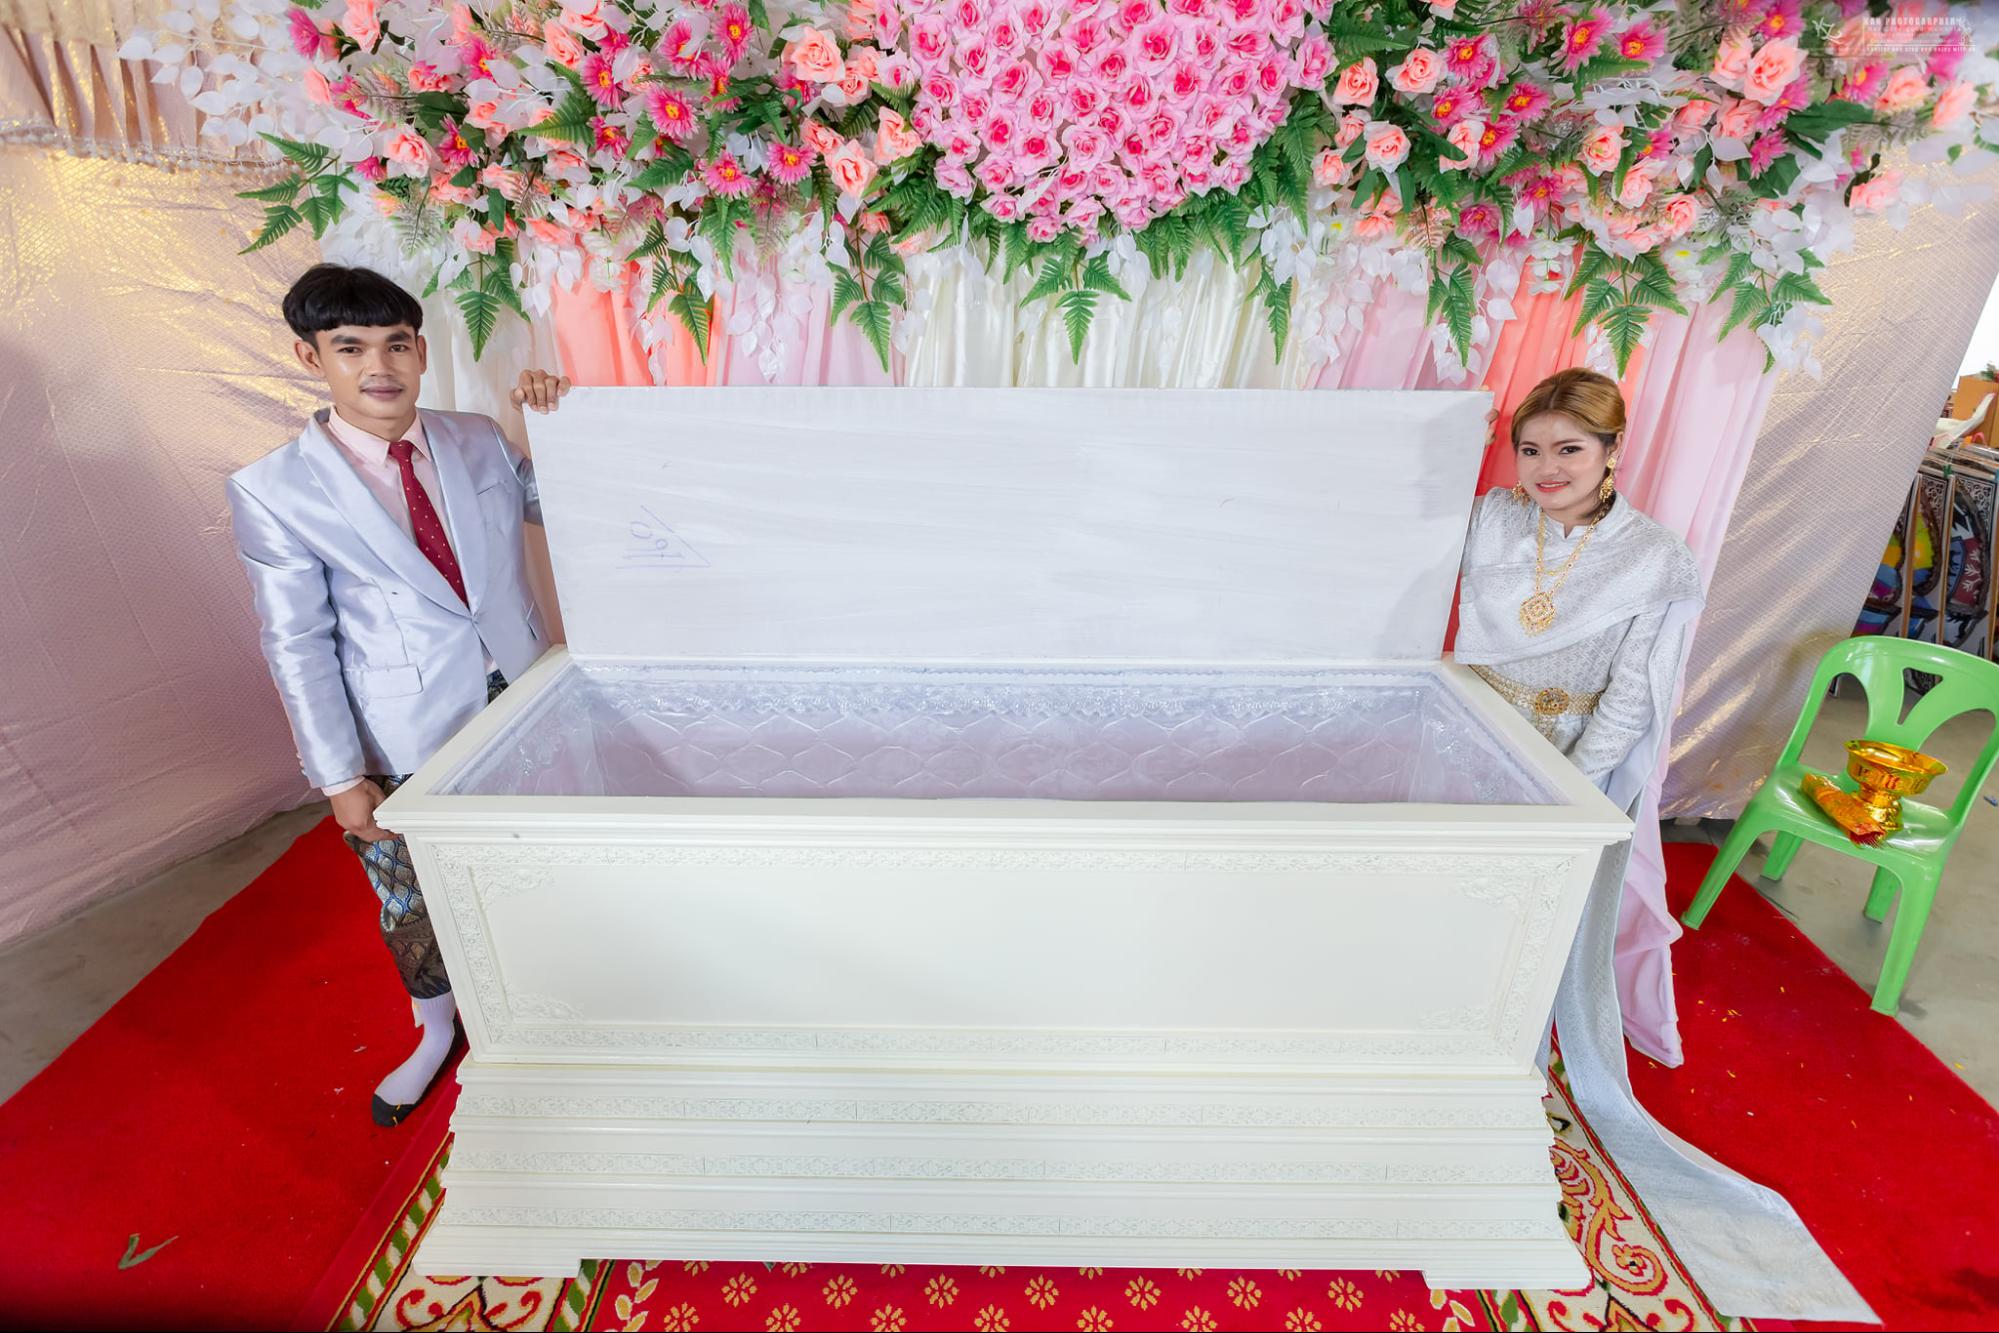 coffin-appears-at-wedding